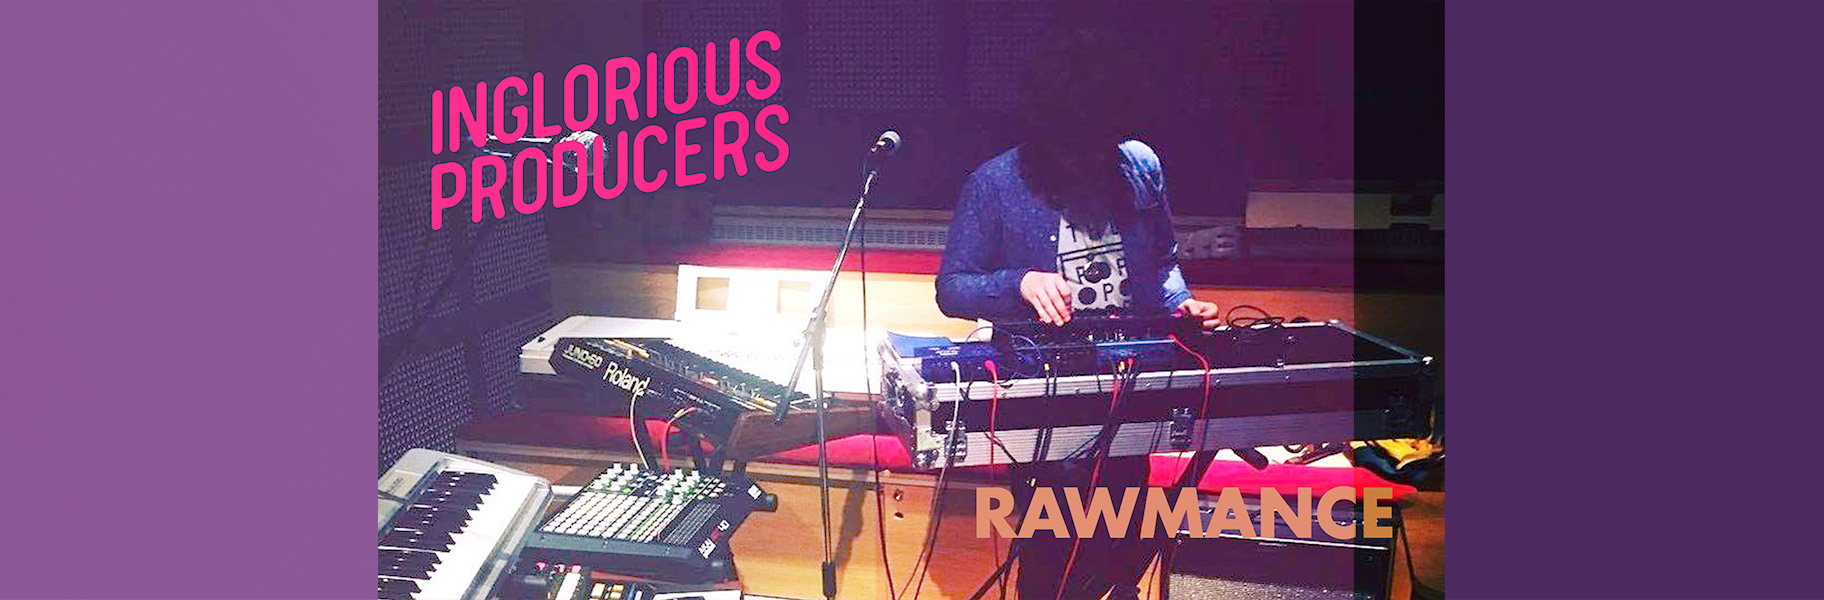 Inglorious producers #rawmance